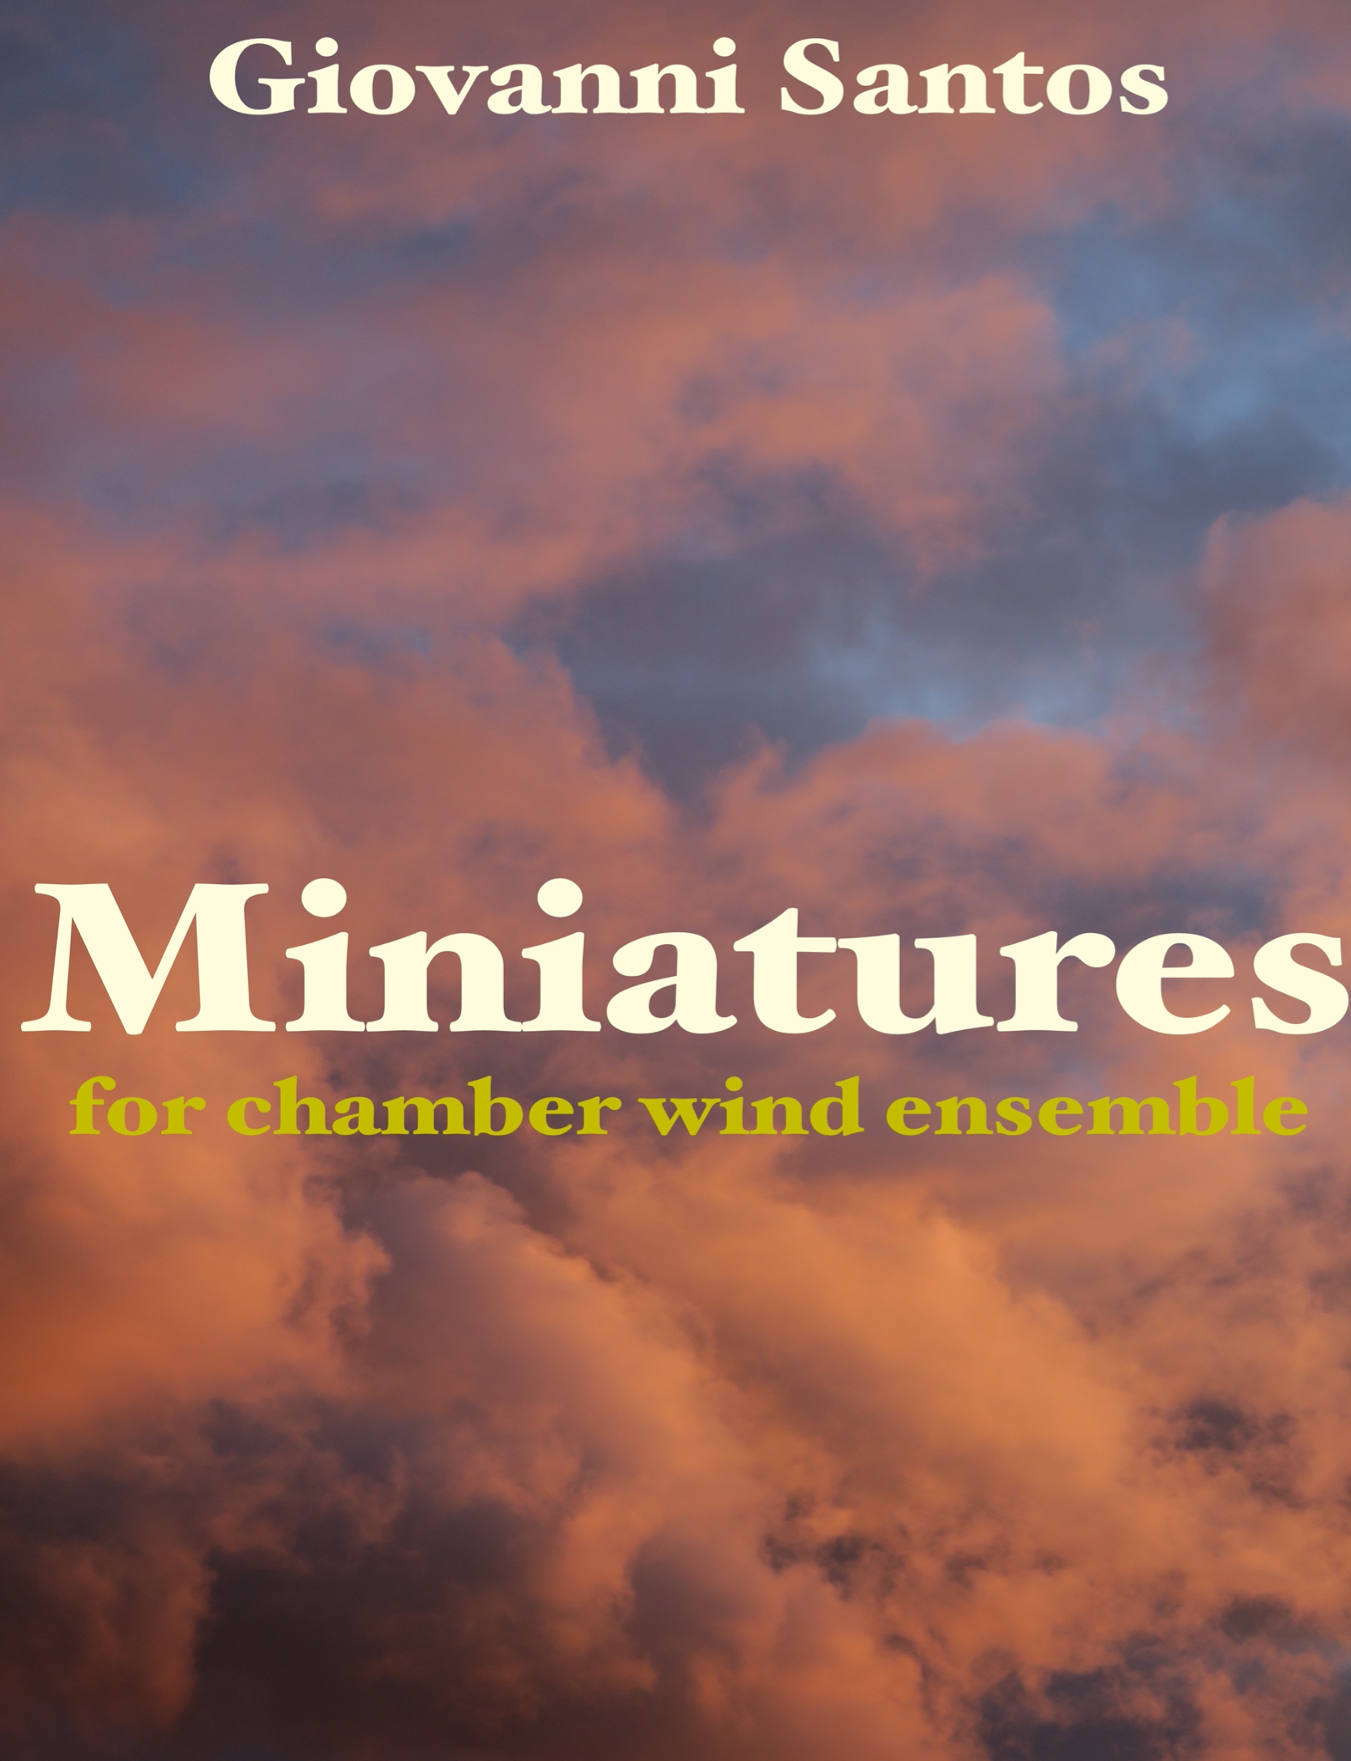 Miniatures (Score Only) by Giovanni Santos